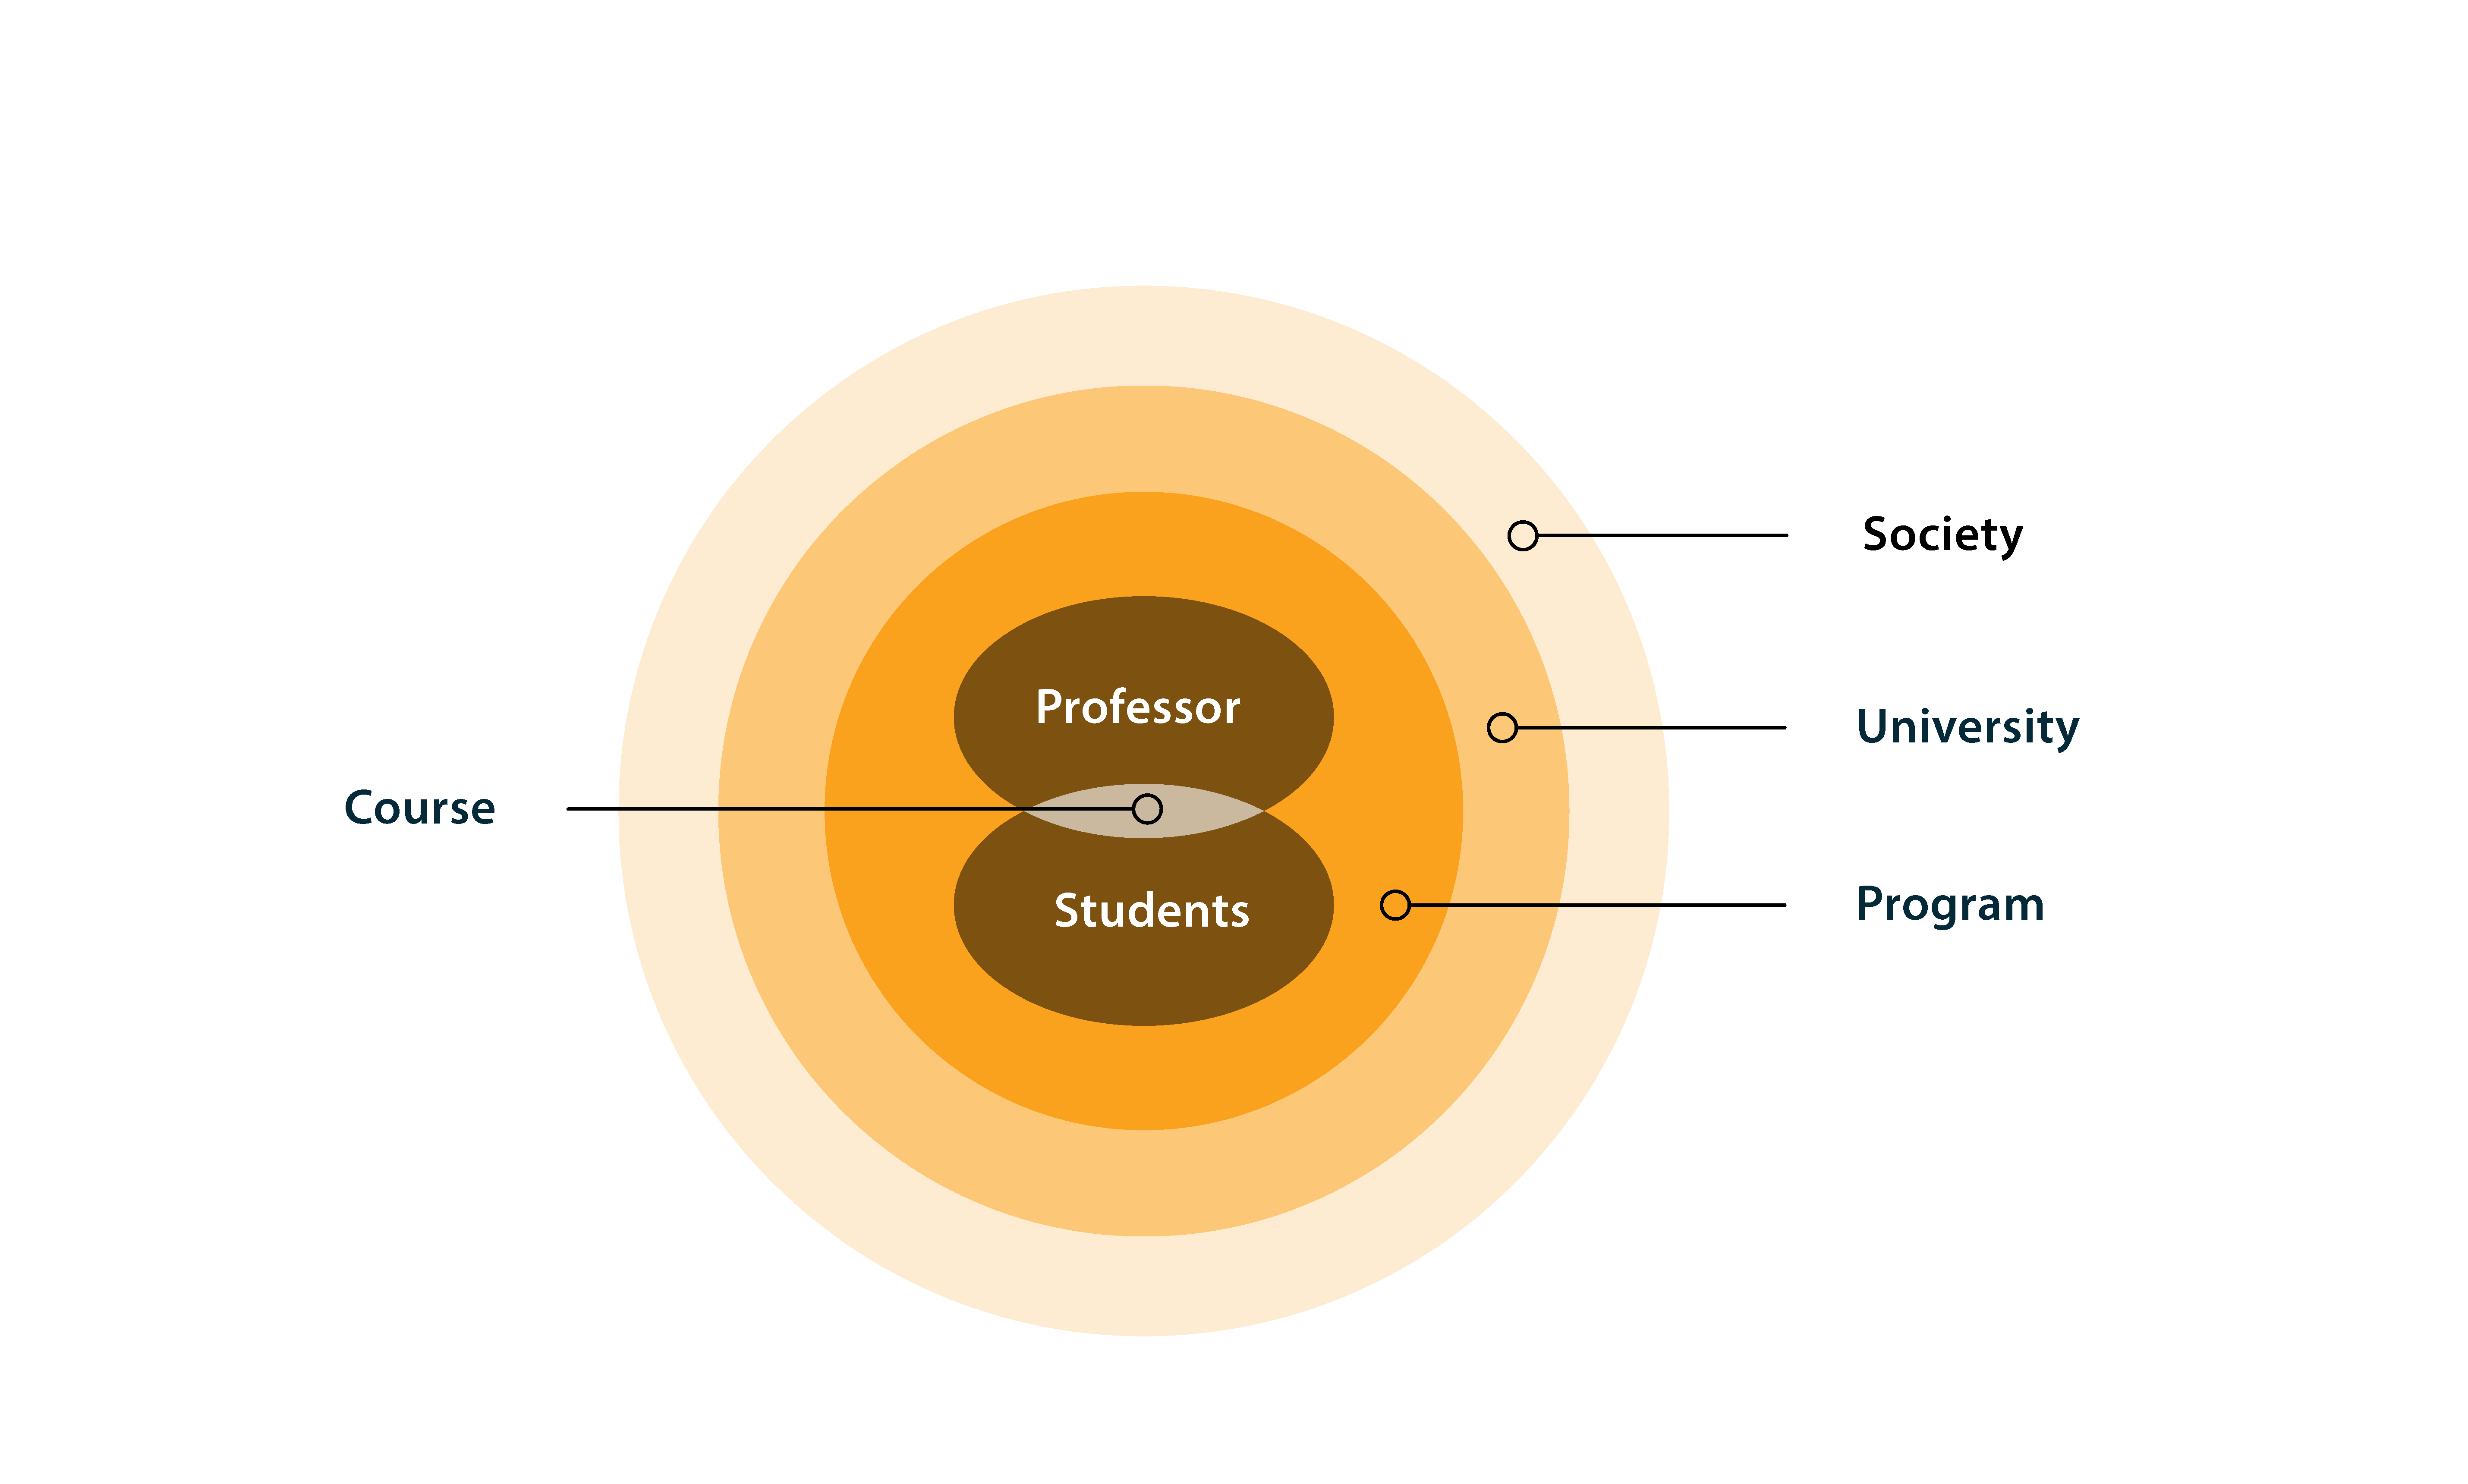 Representation of the learning environment where the course is at the junction of teacher and student, and between students. This environment is influenced by the program, the university and society.